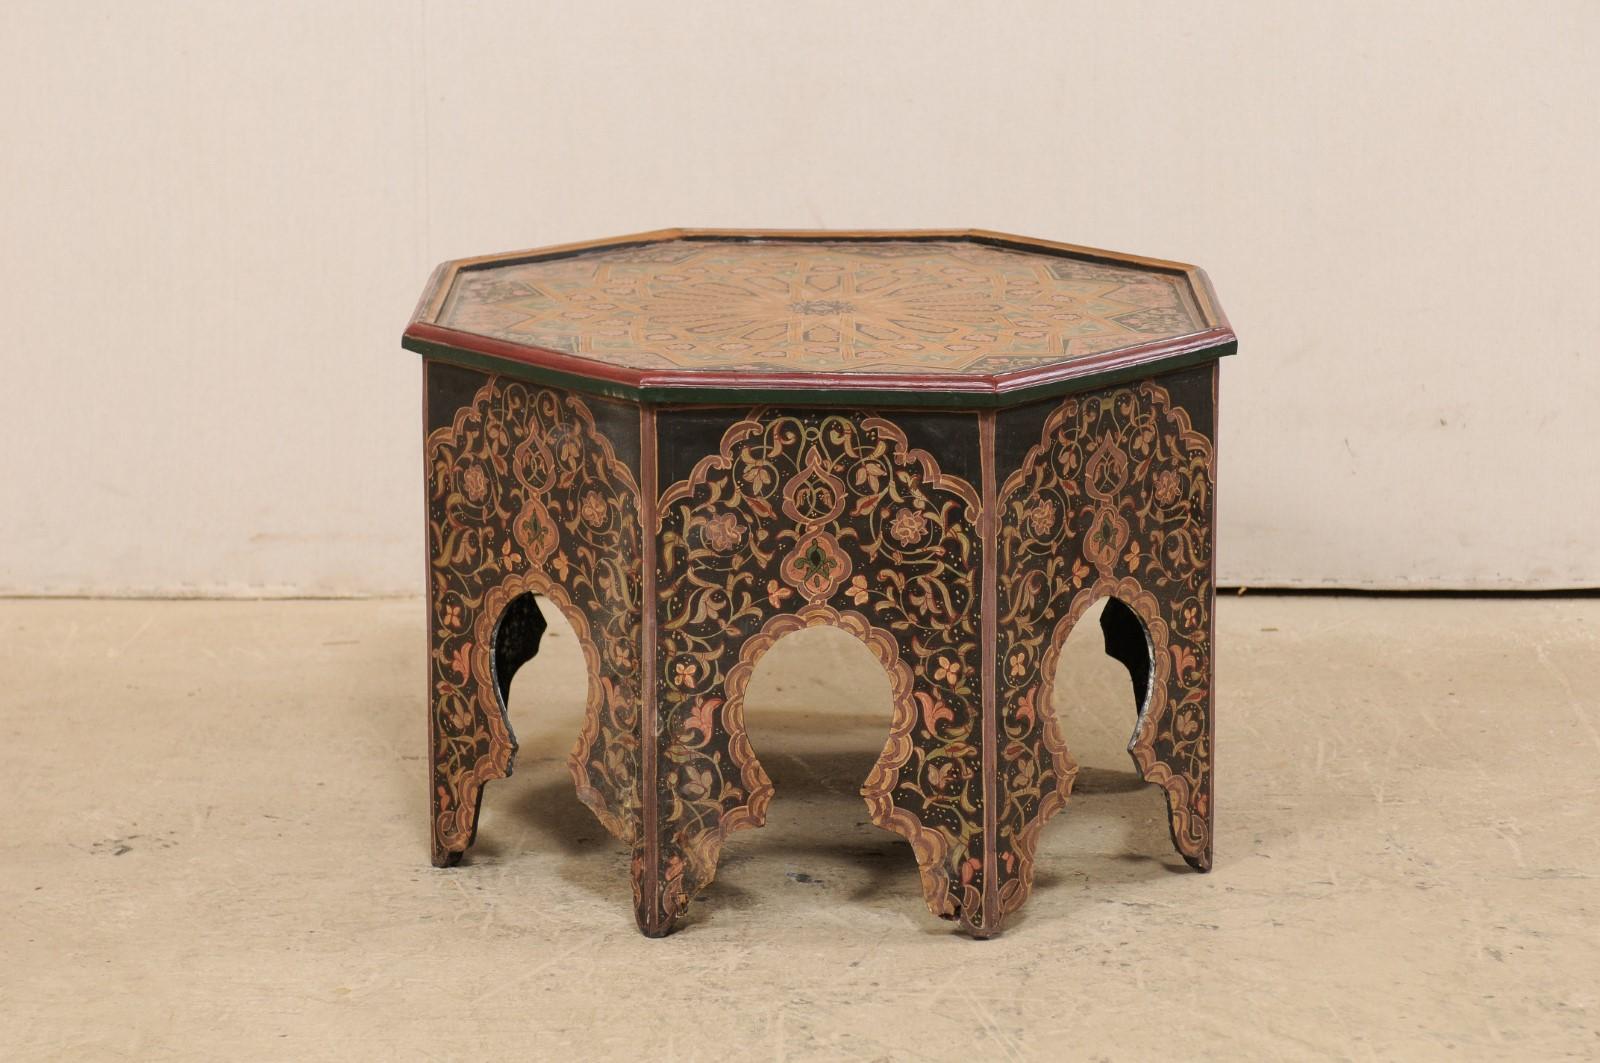 A vintage Moroccan coffee or tea table delicately hand painted in intricate floral and geometric designs. This octagonal-shaped side table from Morocco features a multi-colored floral and geometric designed top, with raised lip about perimeter